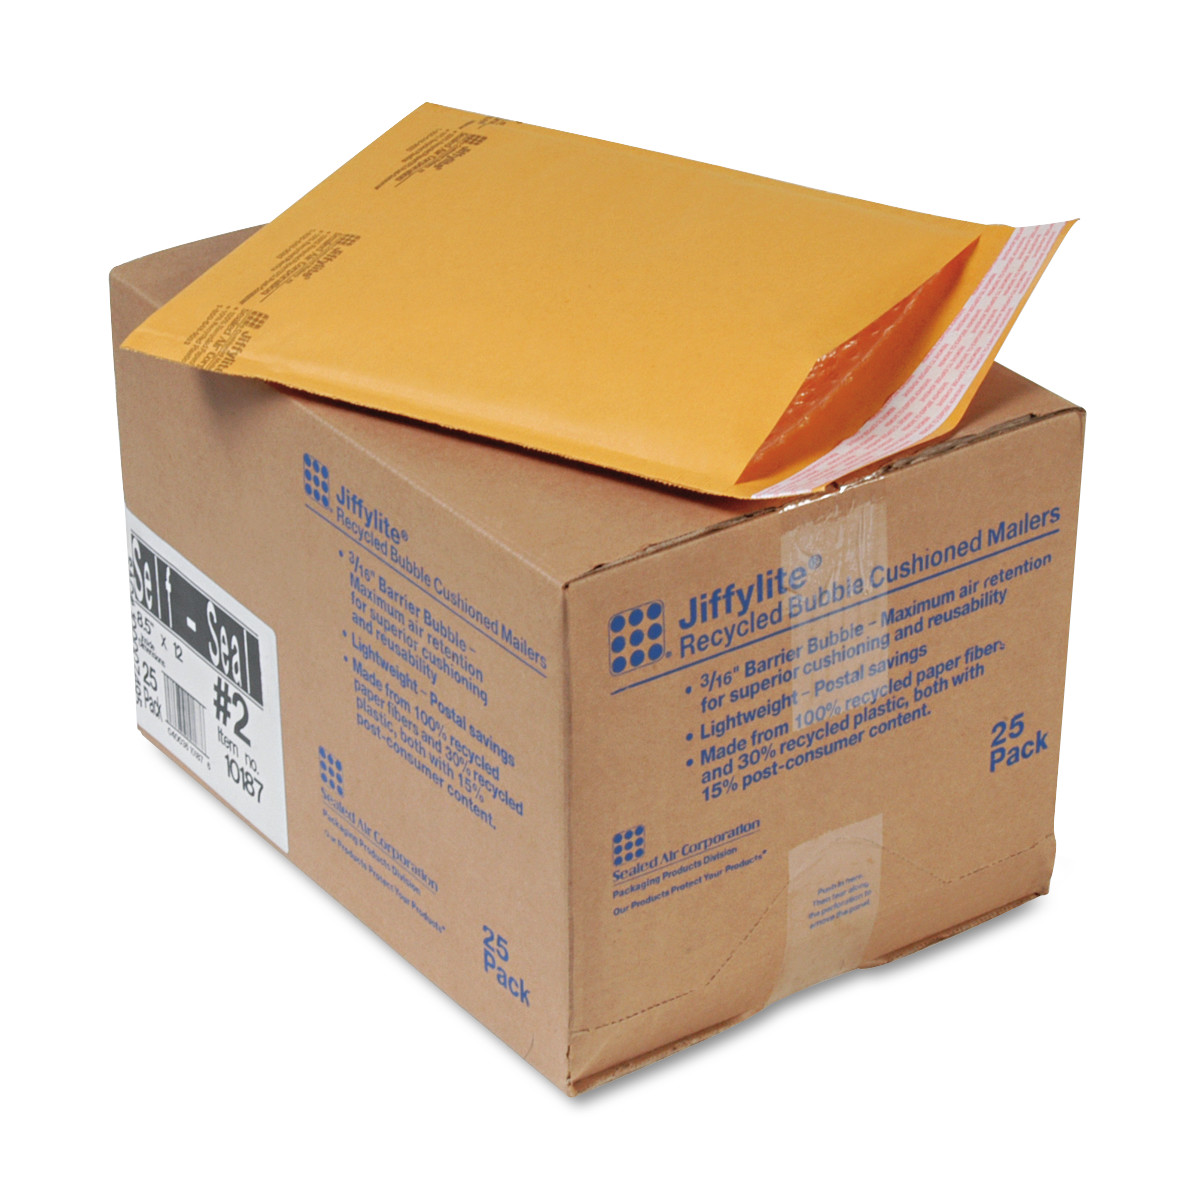 Sealed Air JiffyLite Cellular Cushioned Mailers - Bubble - #2 - 8 1/2" Width x 12" Length - Peel & Seal - Kraft - 25 / Carton - 